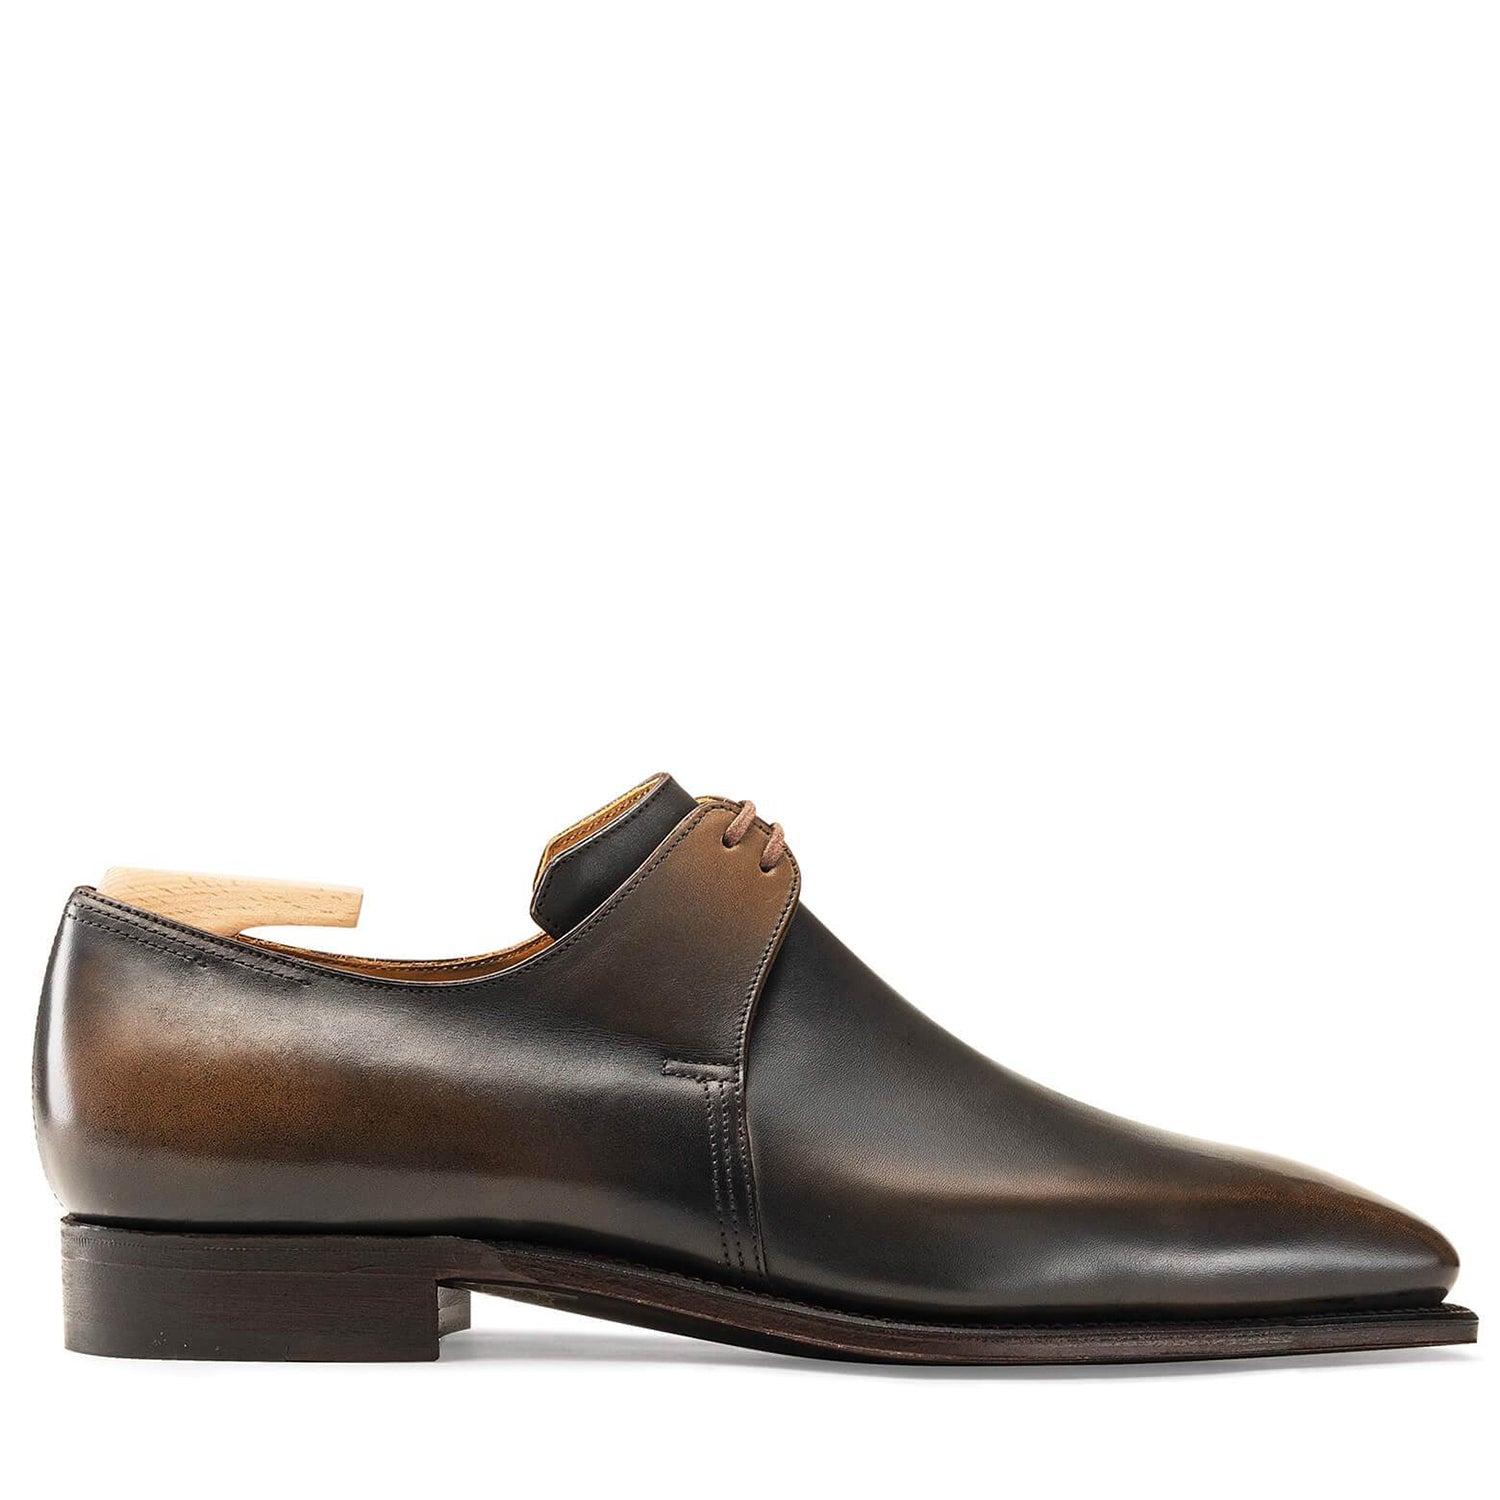 Old Black Calf Leather Shoes